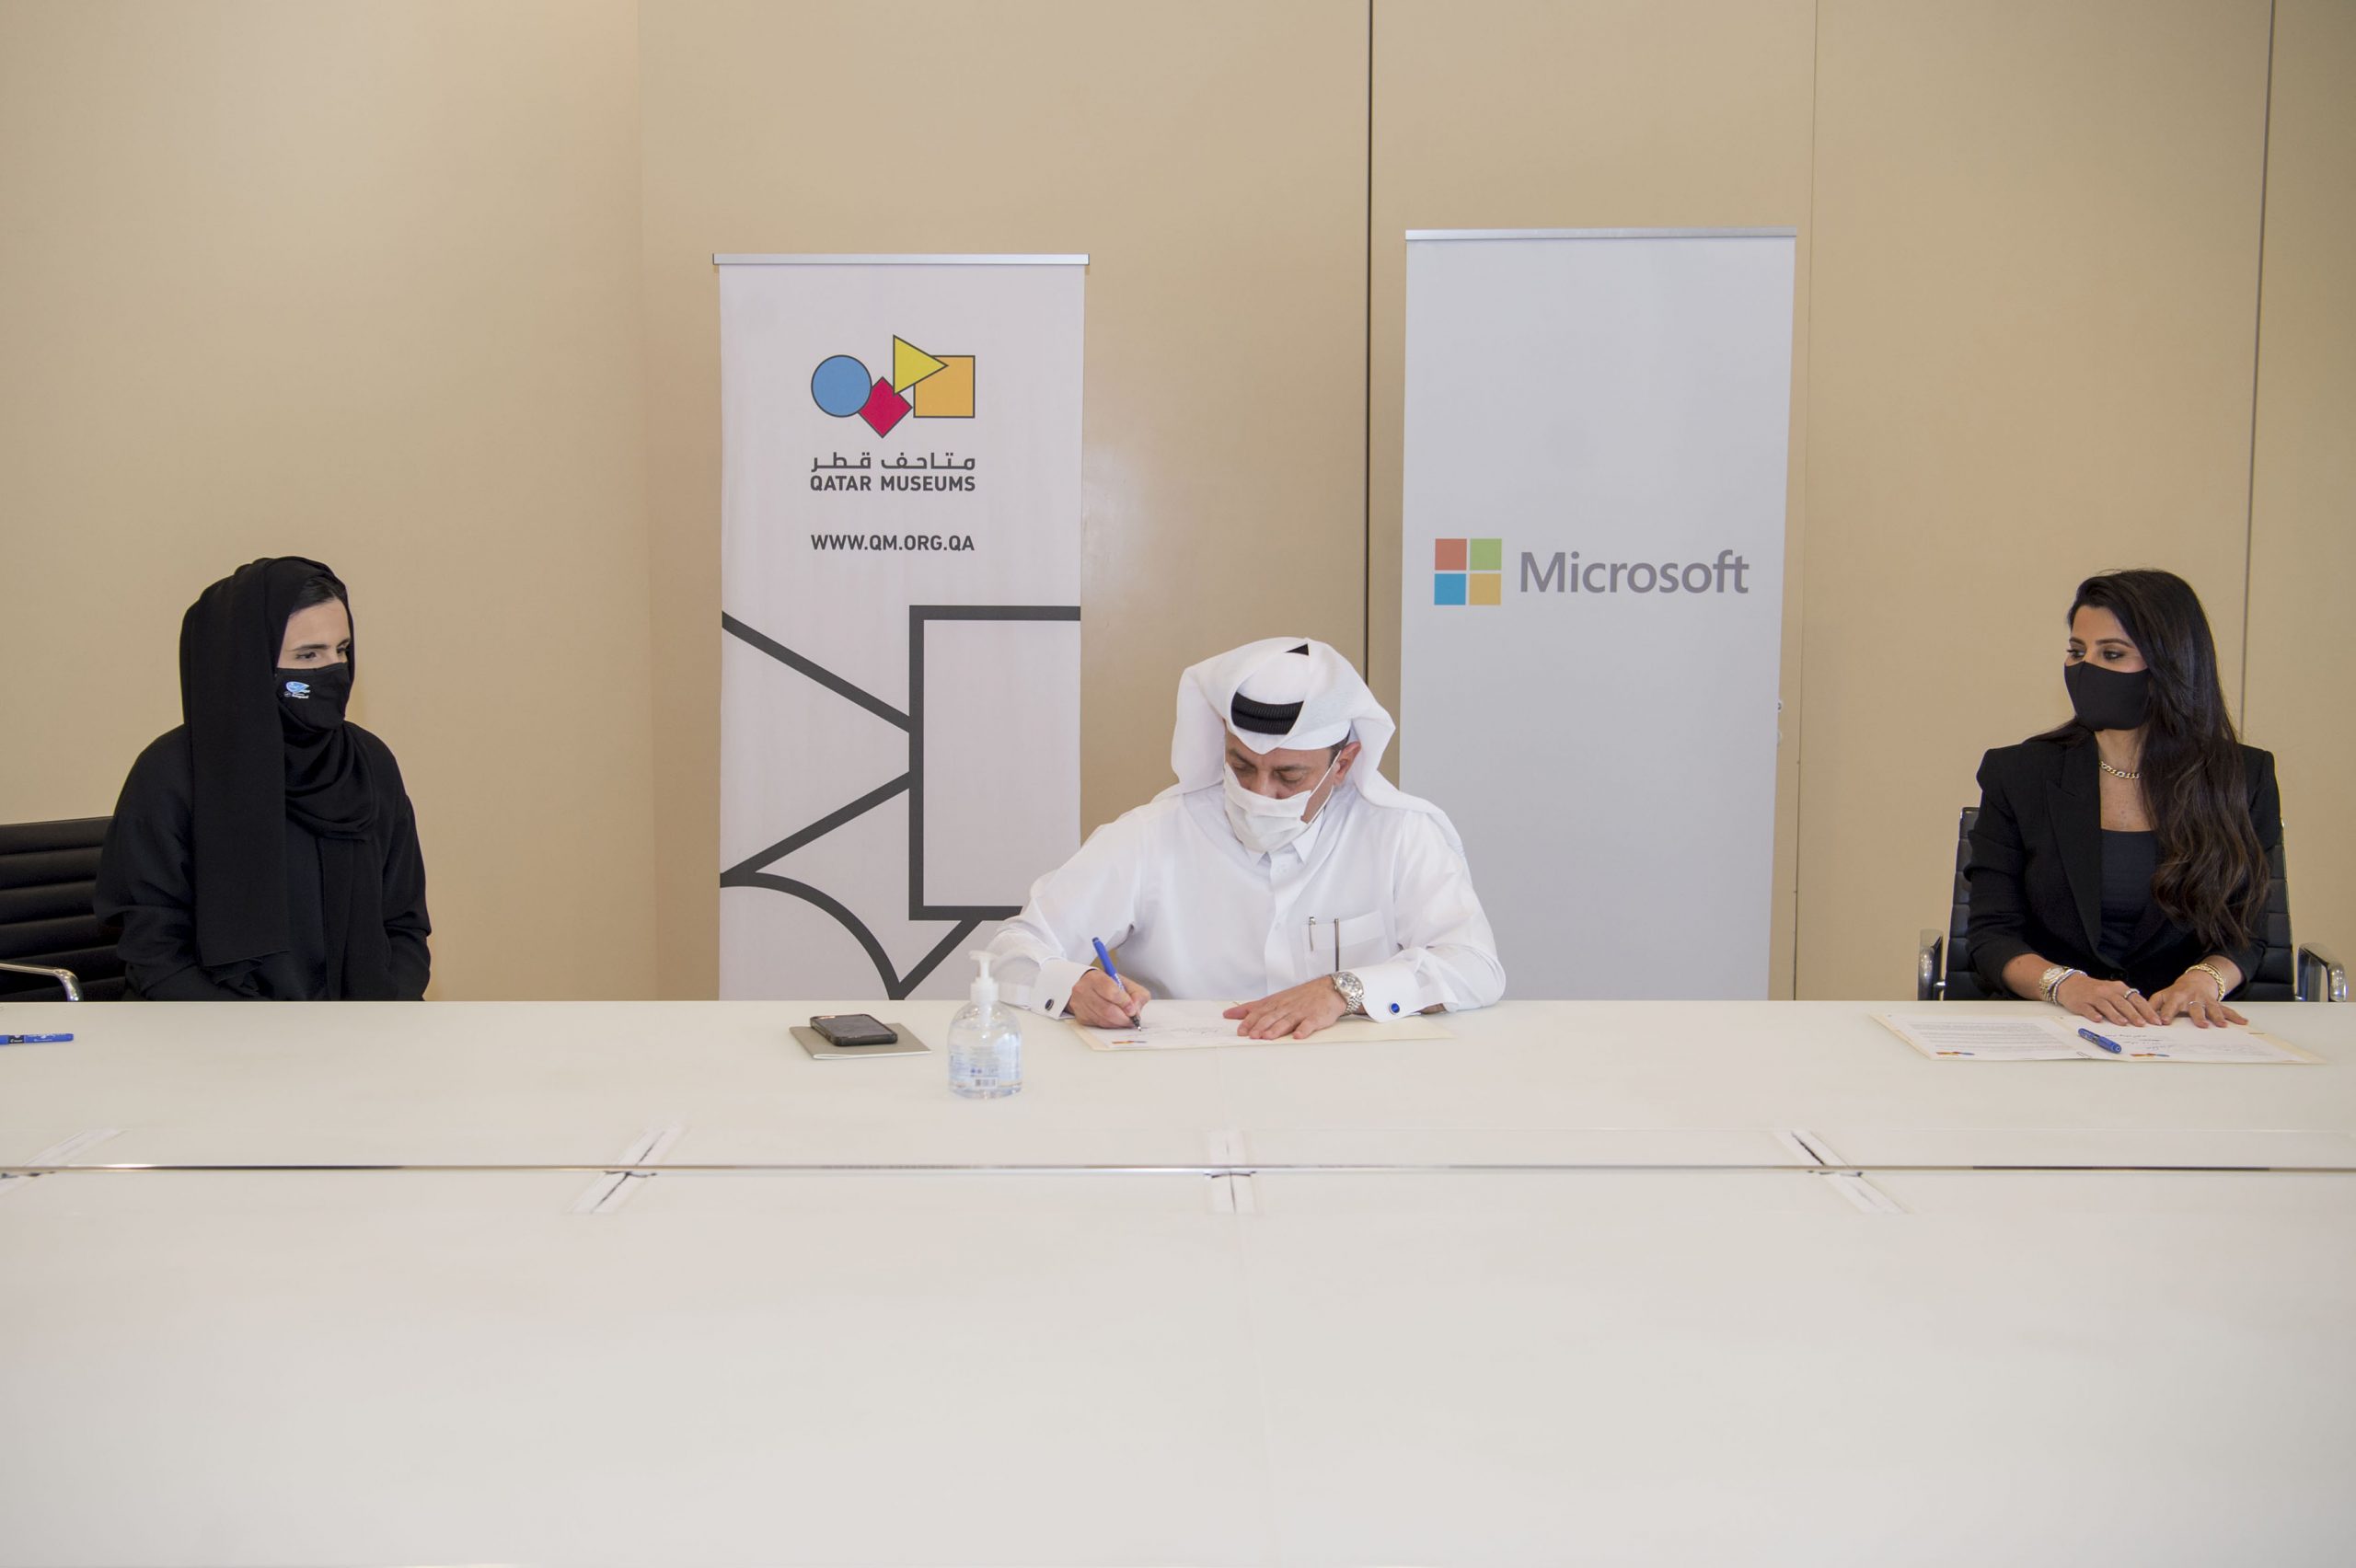  A picture of spokespersons from Microsoft and Qatar Museums during signing the agreement 